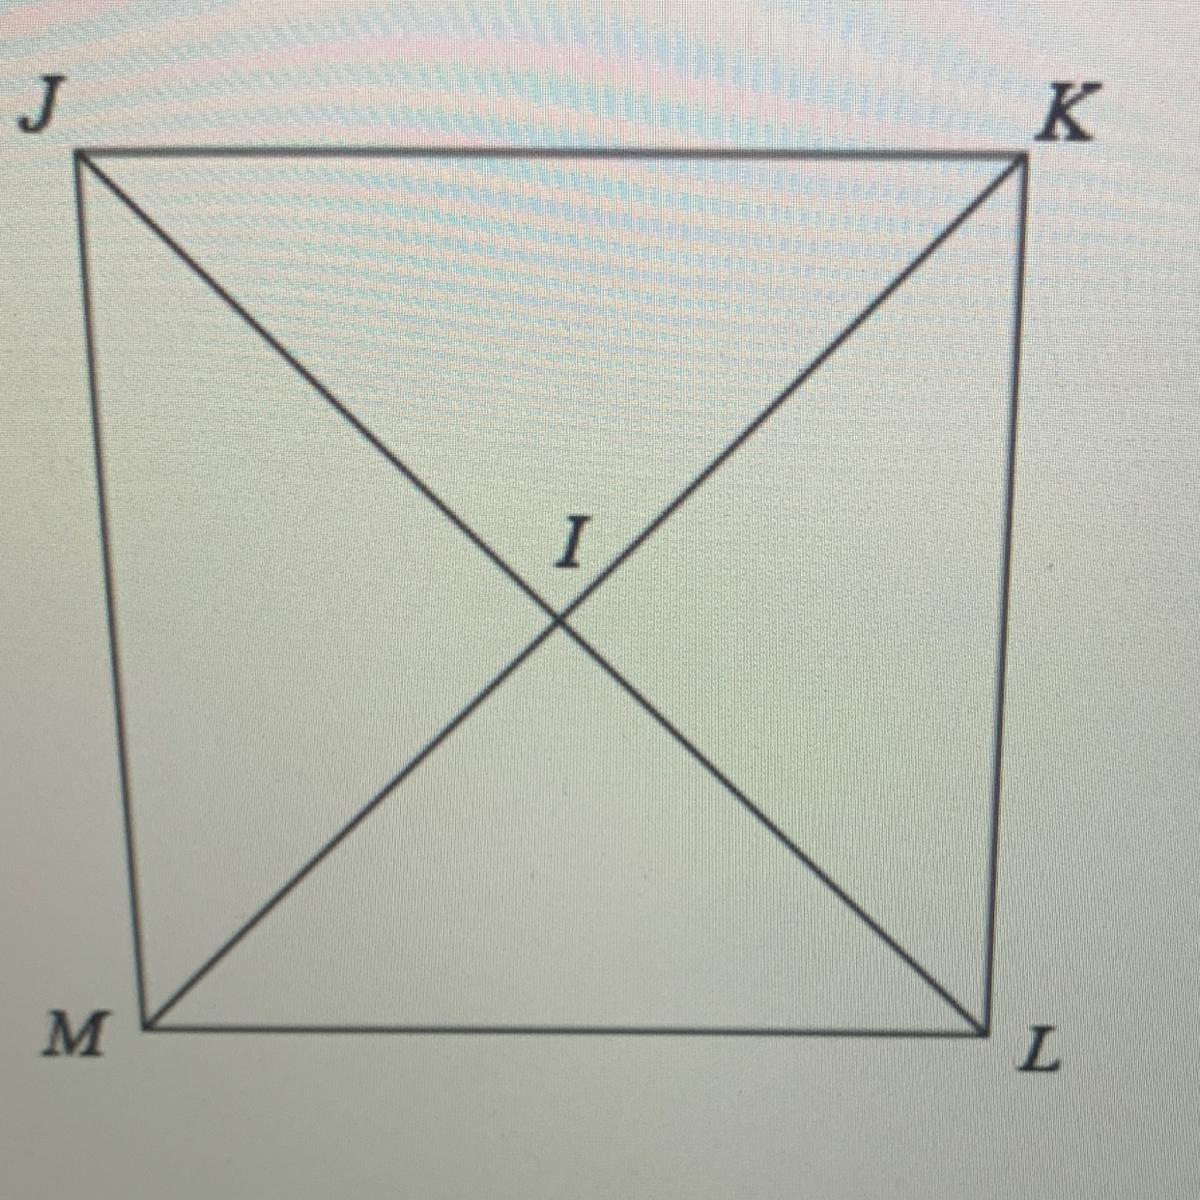 Calculate The Area Of The Square JKLM If KM = 42 Mm.